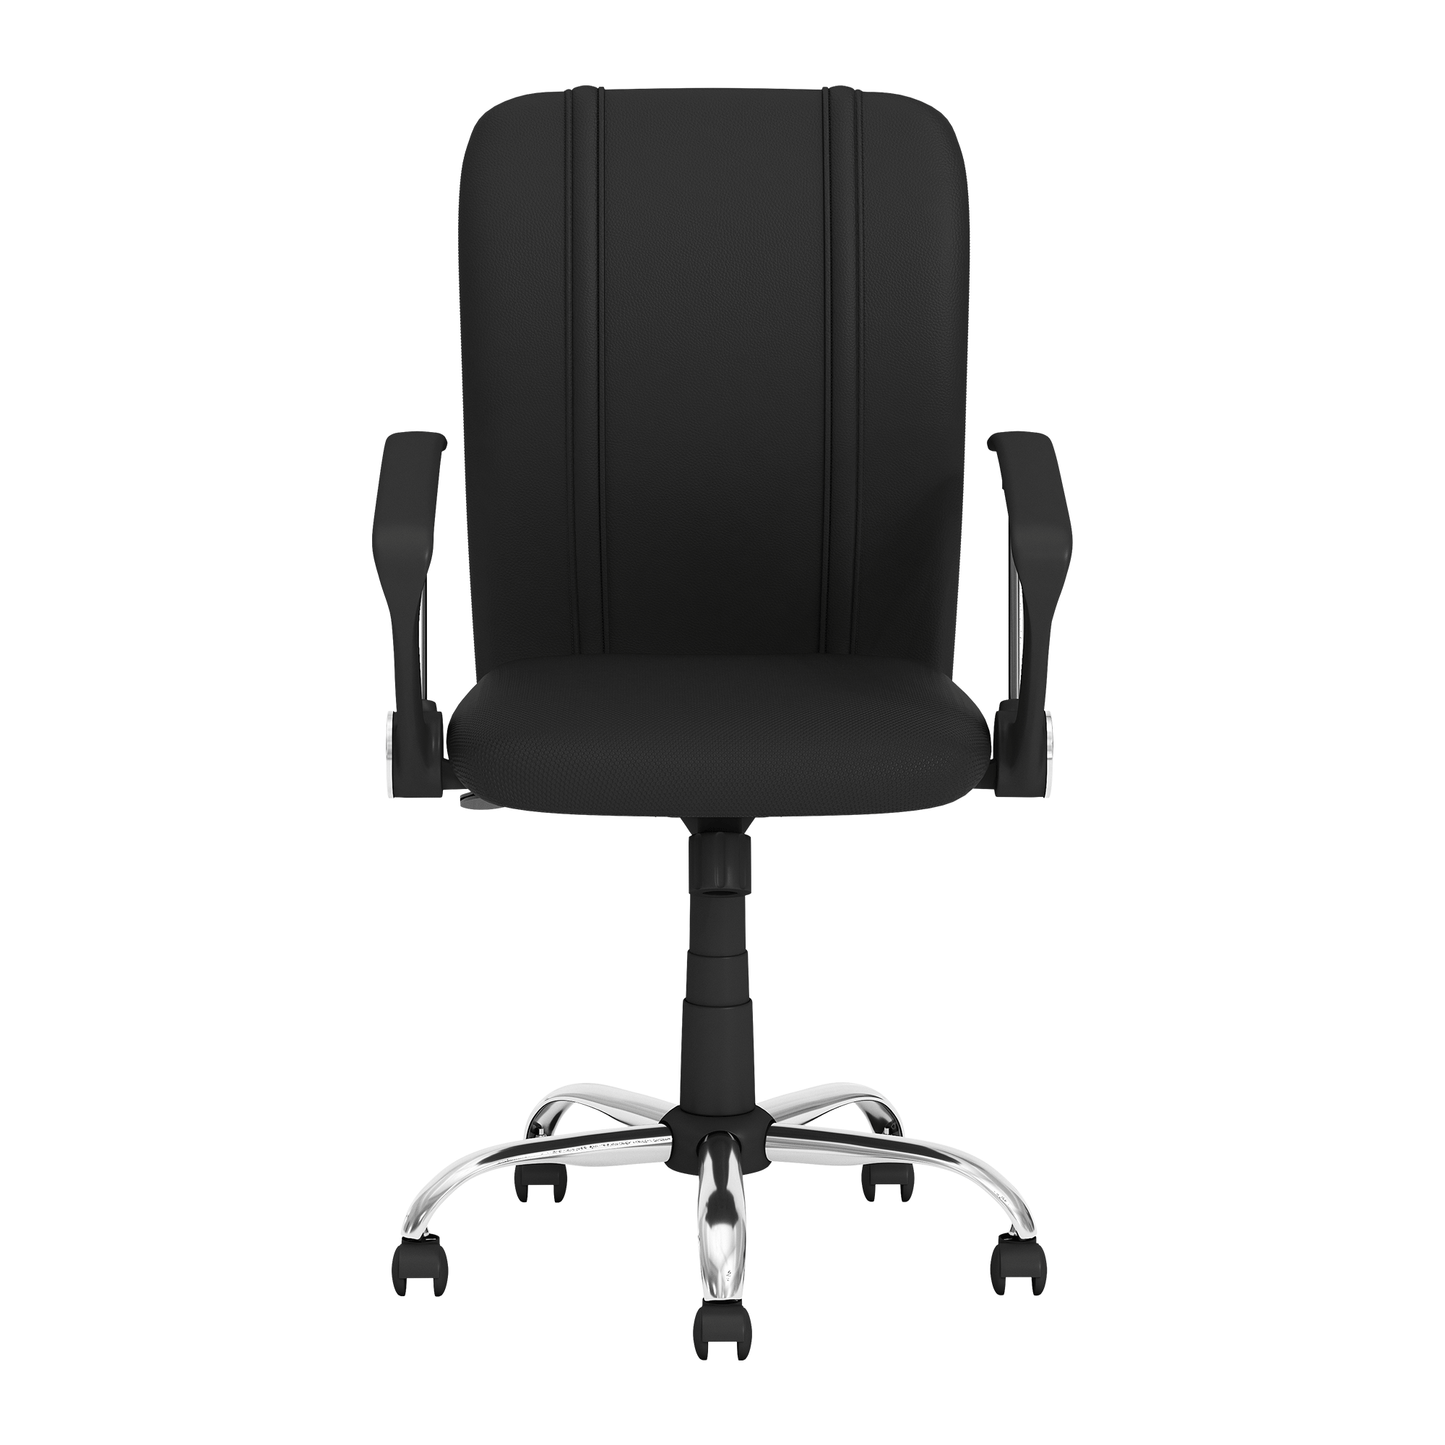 Curve Task Chair with Tampa Bay Buccaneers Classic Logo